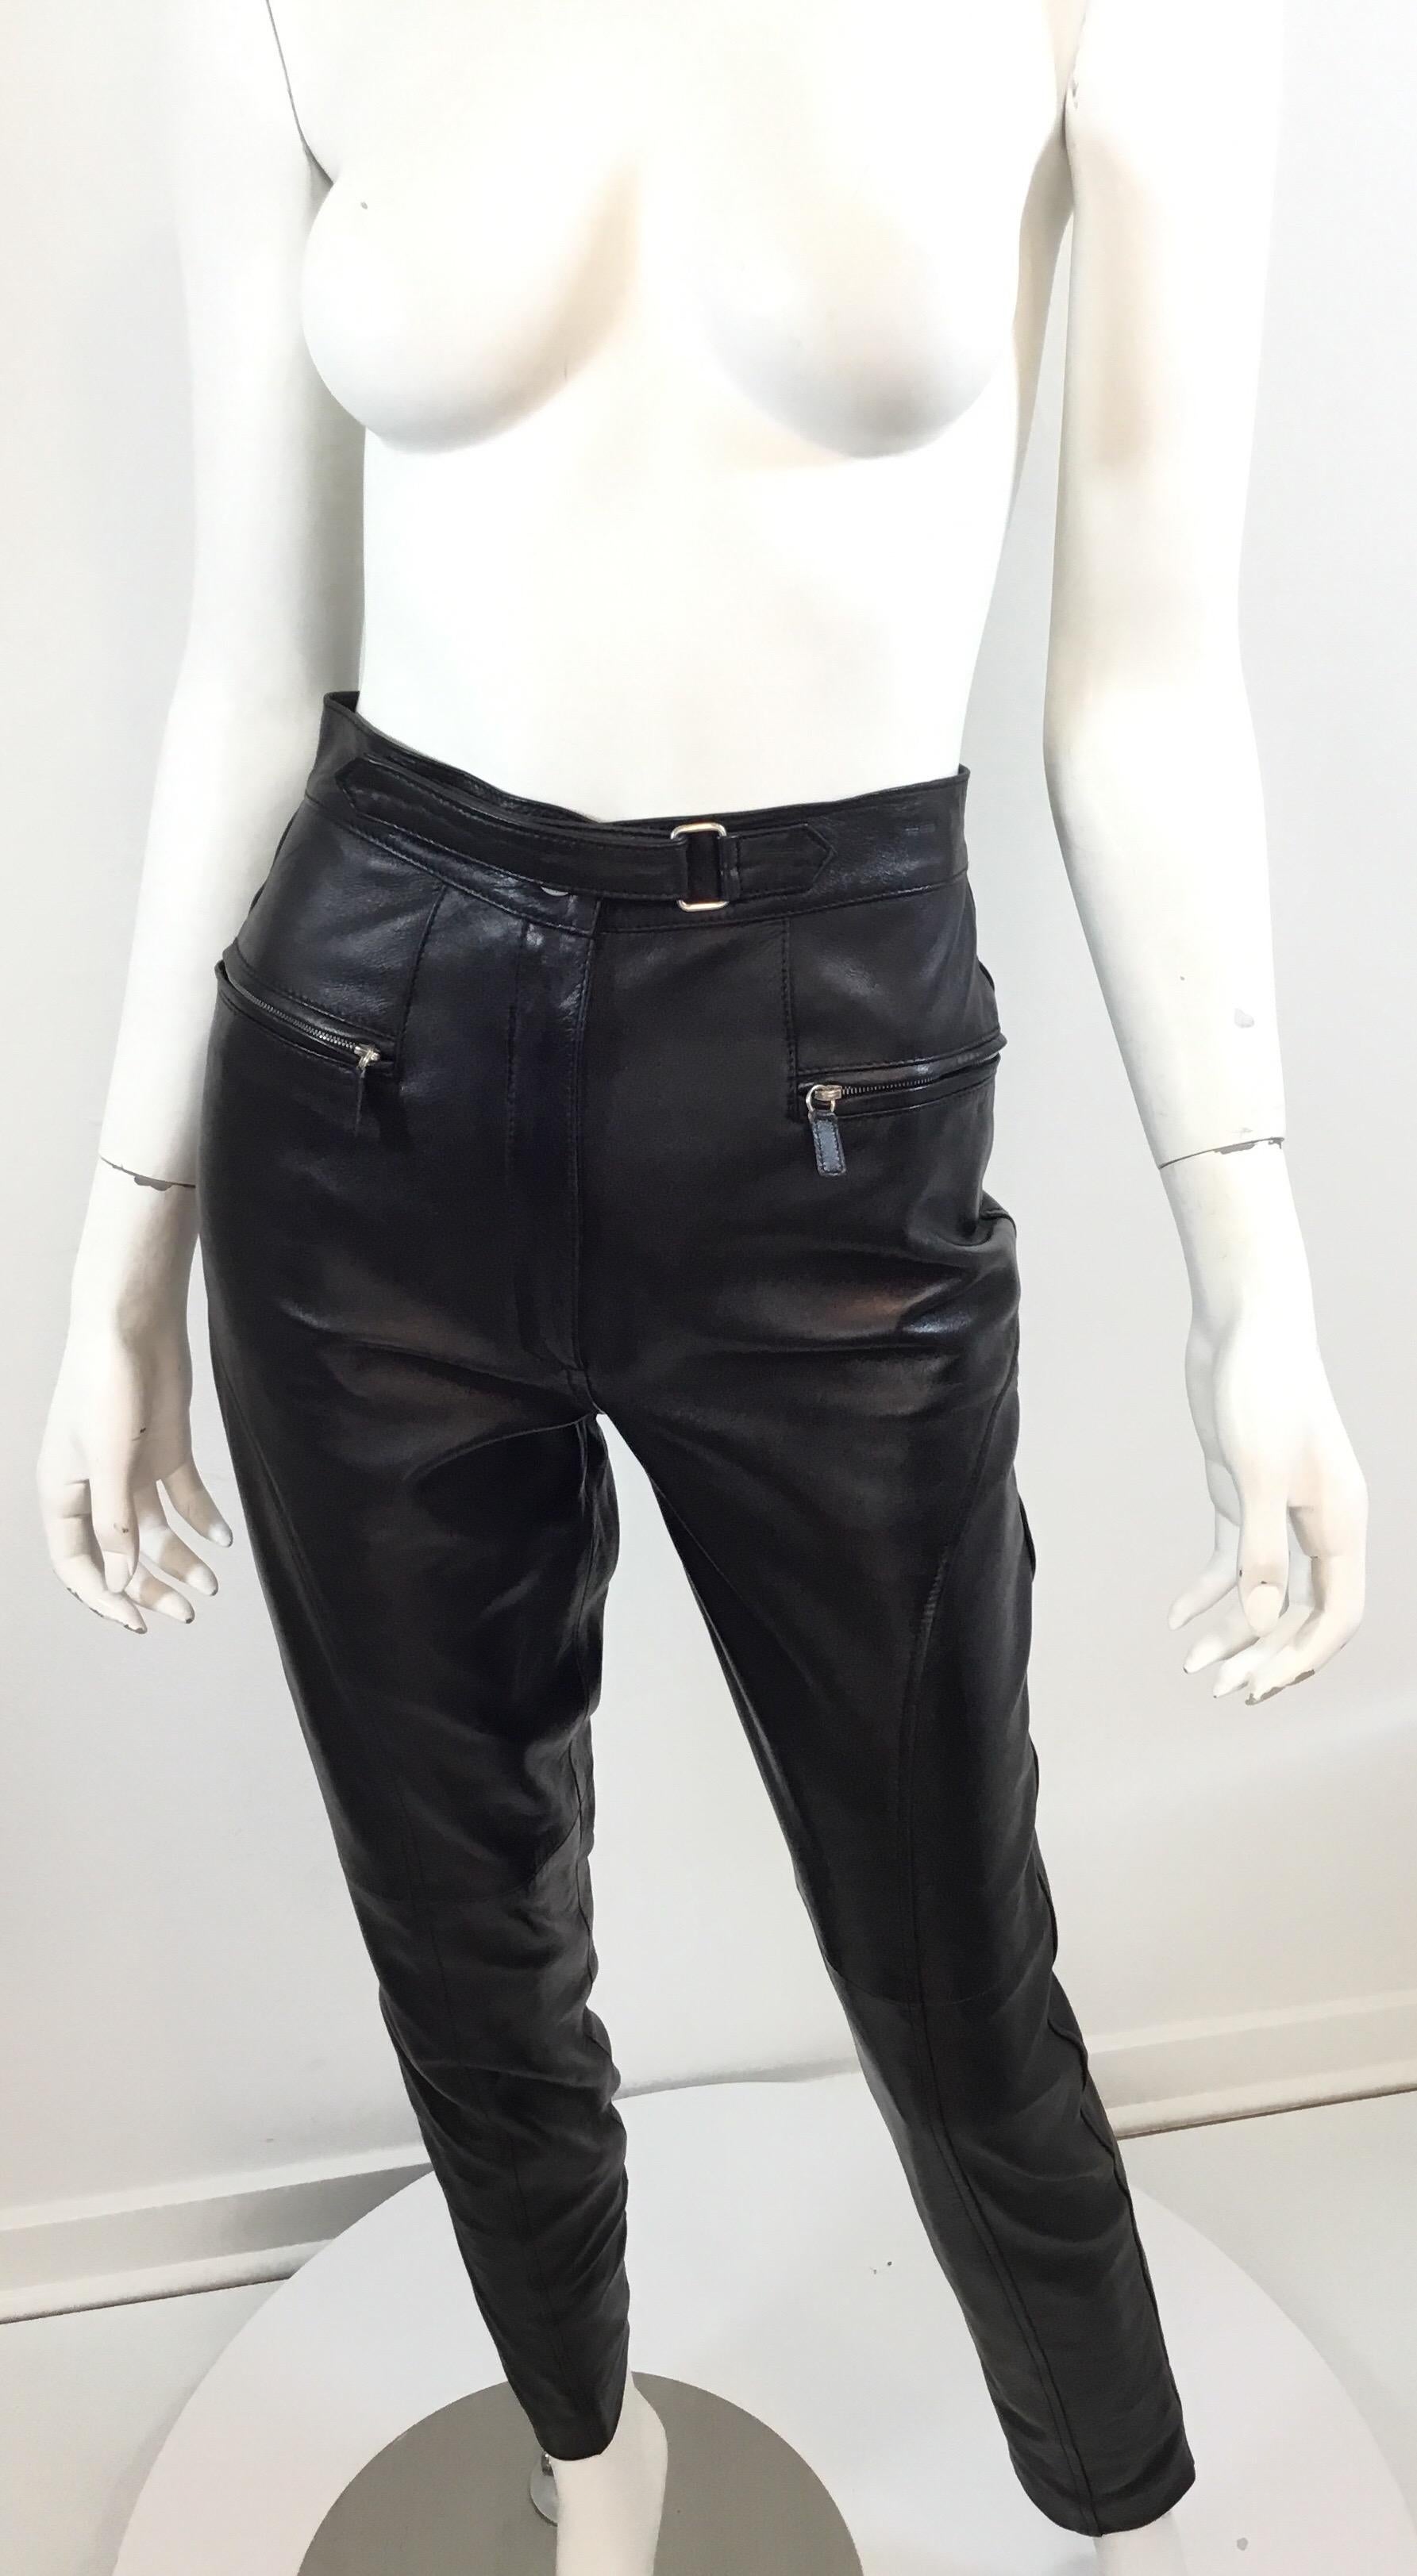 Tom Ford for Gucci black leather pants are featured in a size 40 and fully lined. Pants have a button, zipper closure, and a Velcro Strap. Two functional zipper pockets at the front with silver hardware. Excellent condition.

Waist 25”, hips 34”,